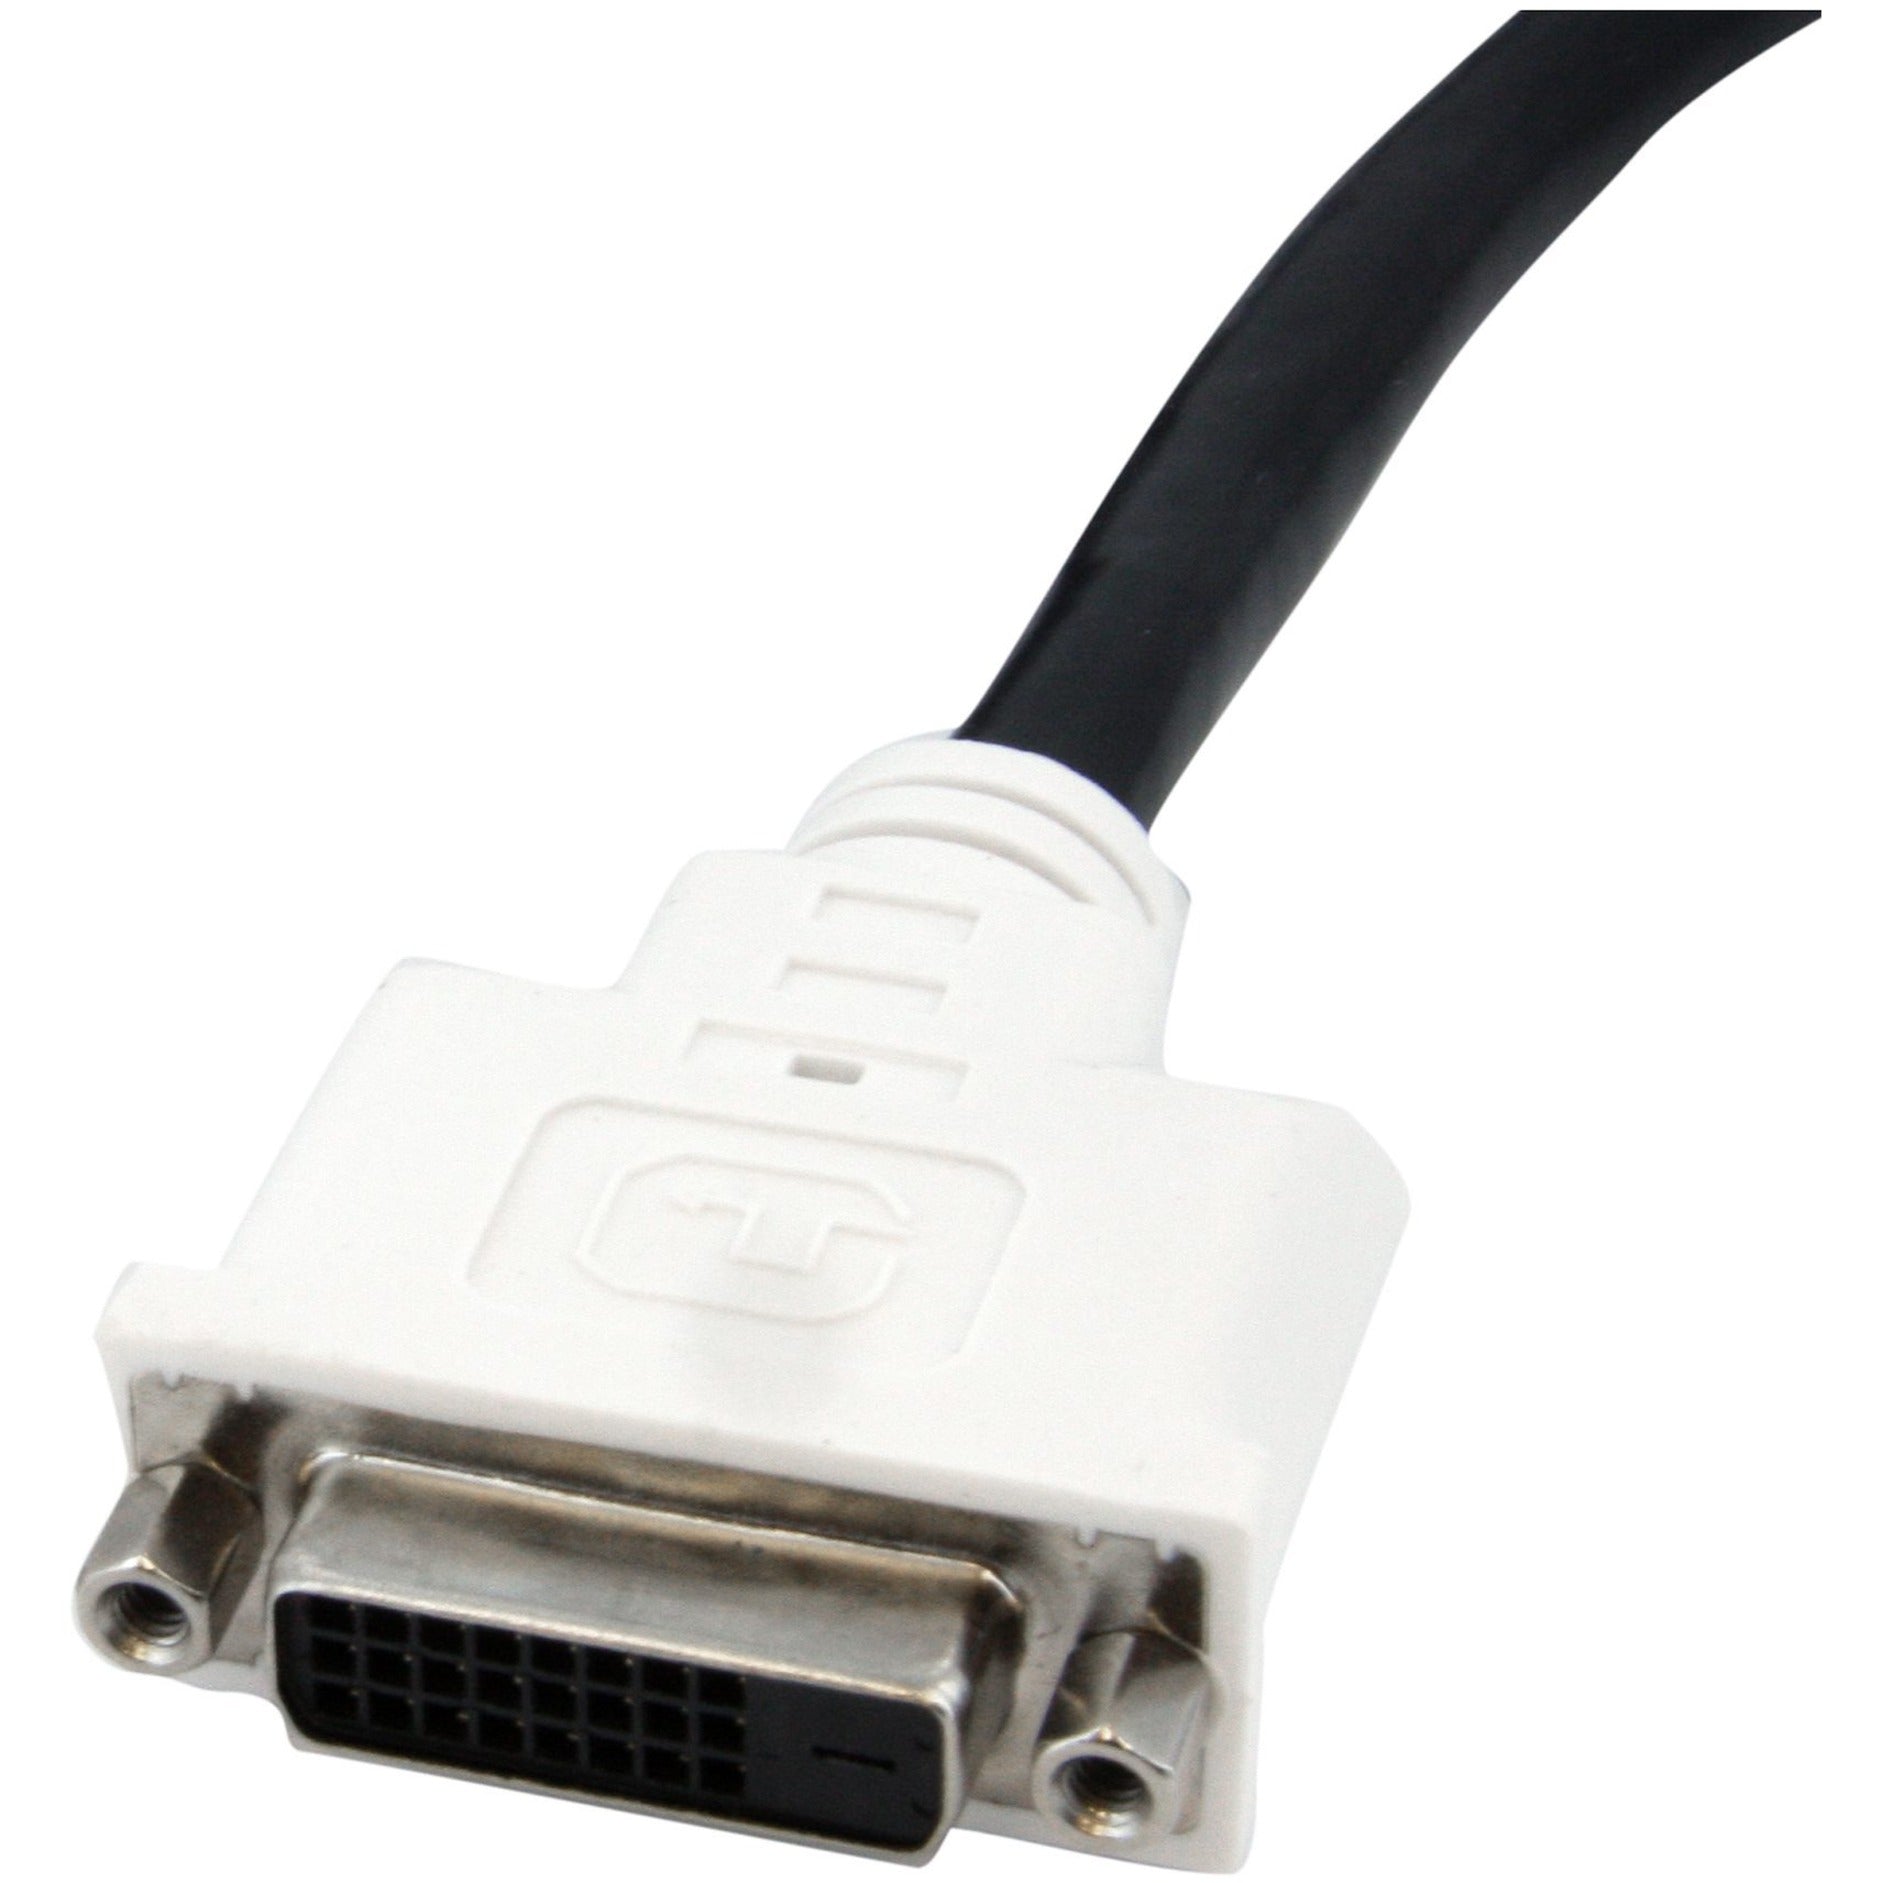 StarTech.com DVIDDMF6 6ft DVI-D DL Digital Video Monitor Cable, EMI Protection, 9.9 Gbit/s Data Transfer Rate, 2560 x 1600 Supported Resolution